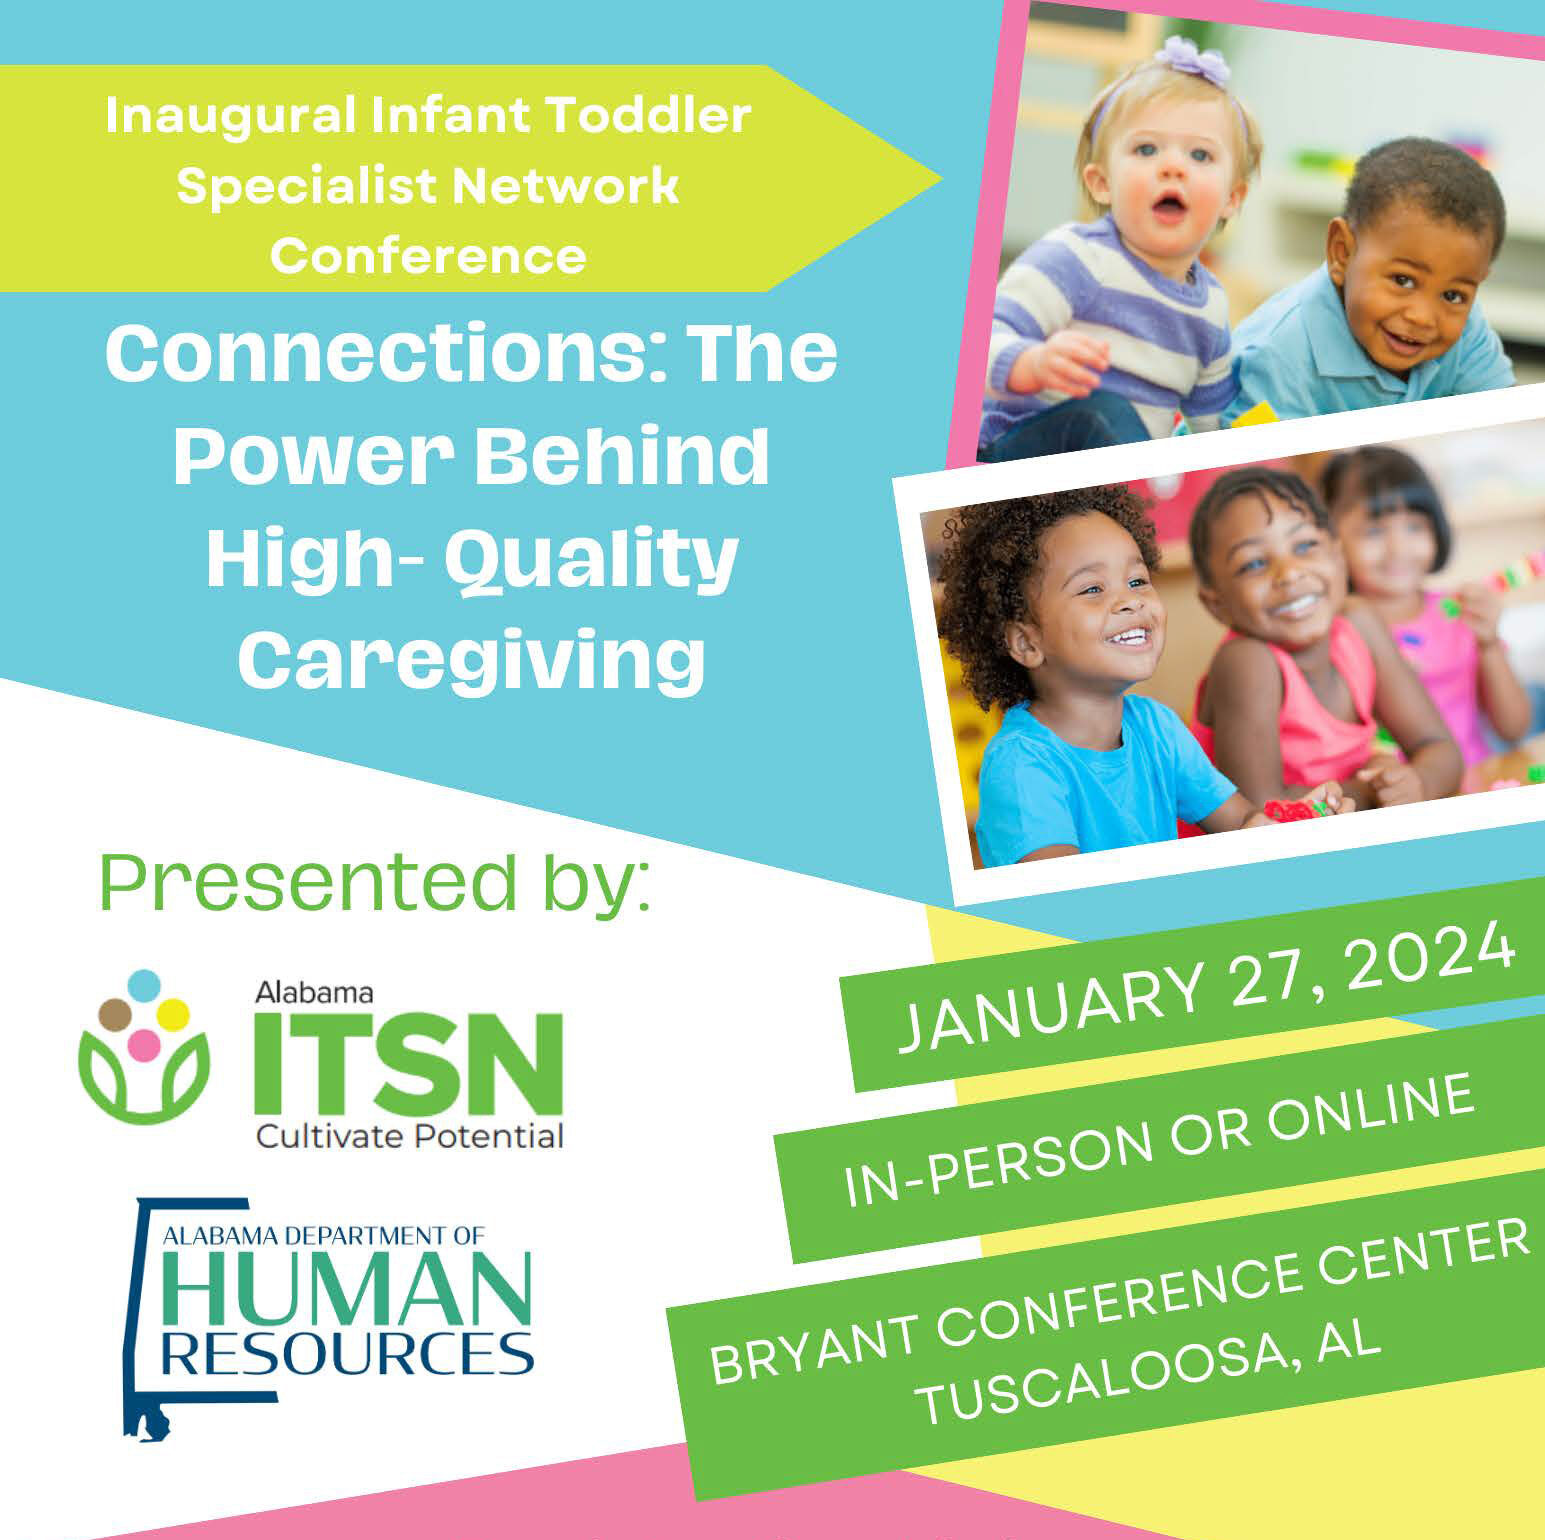 Alabama Infant Toddler Specialist Network Conference January 27 Bryant Conference Center